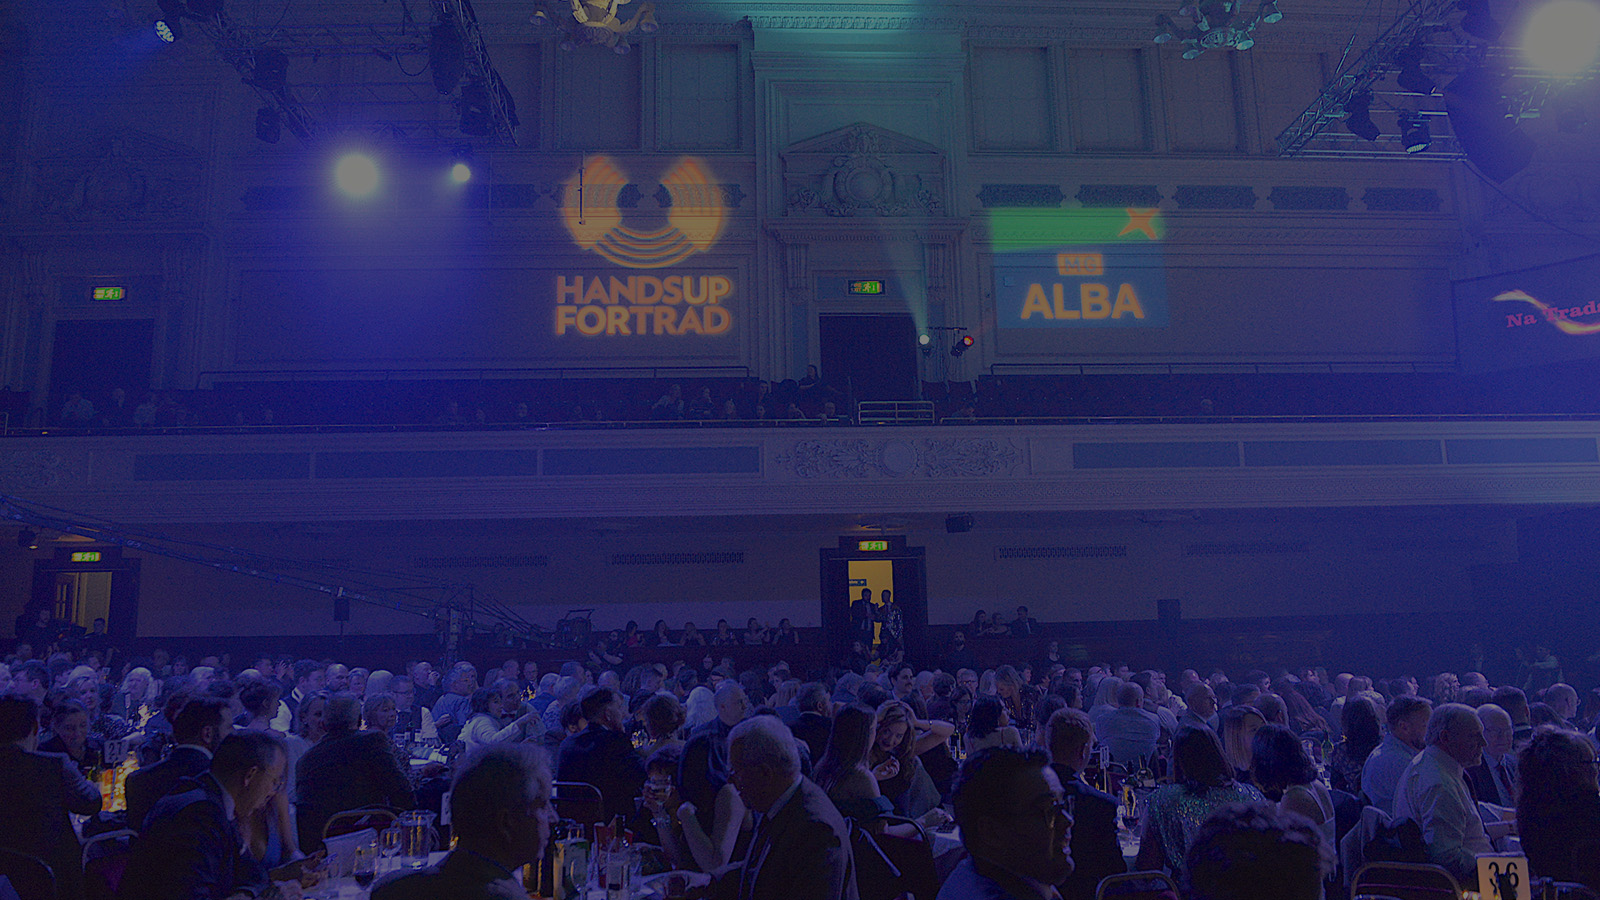 A large audience seated around dinner tables in a atmospheric auditorium, with the logos for the MG Alba Scots Trad Awards projected on to the wall